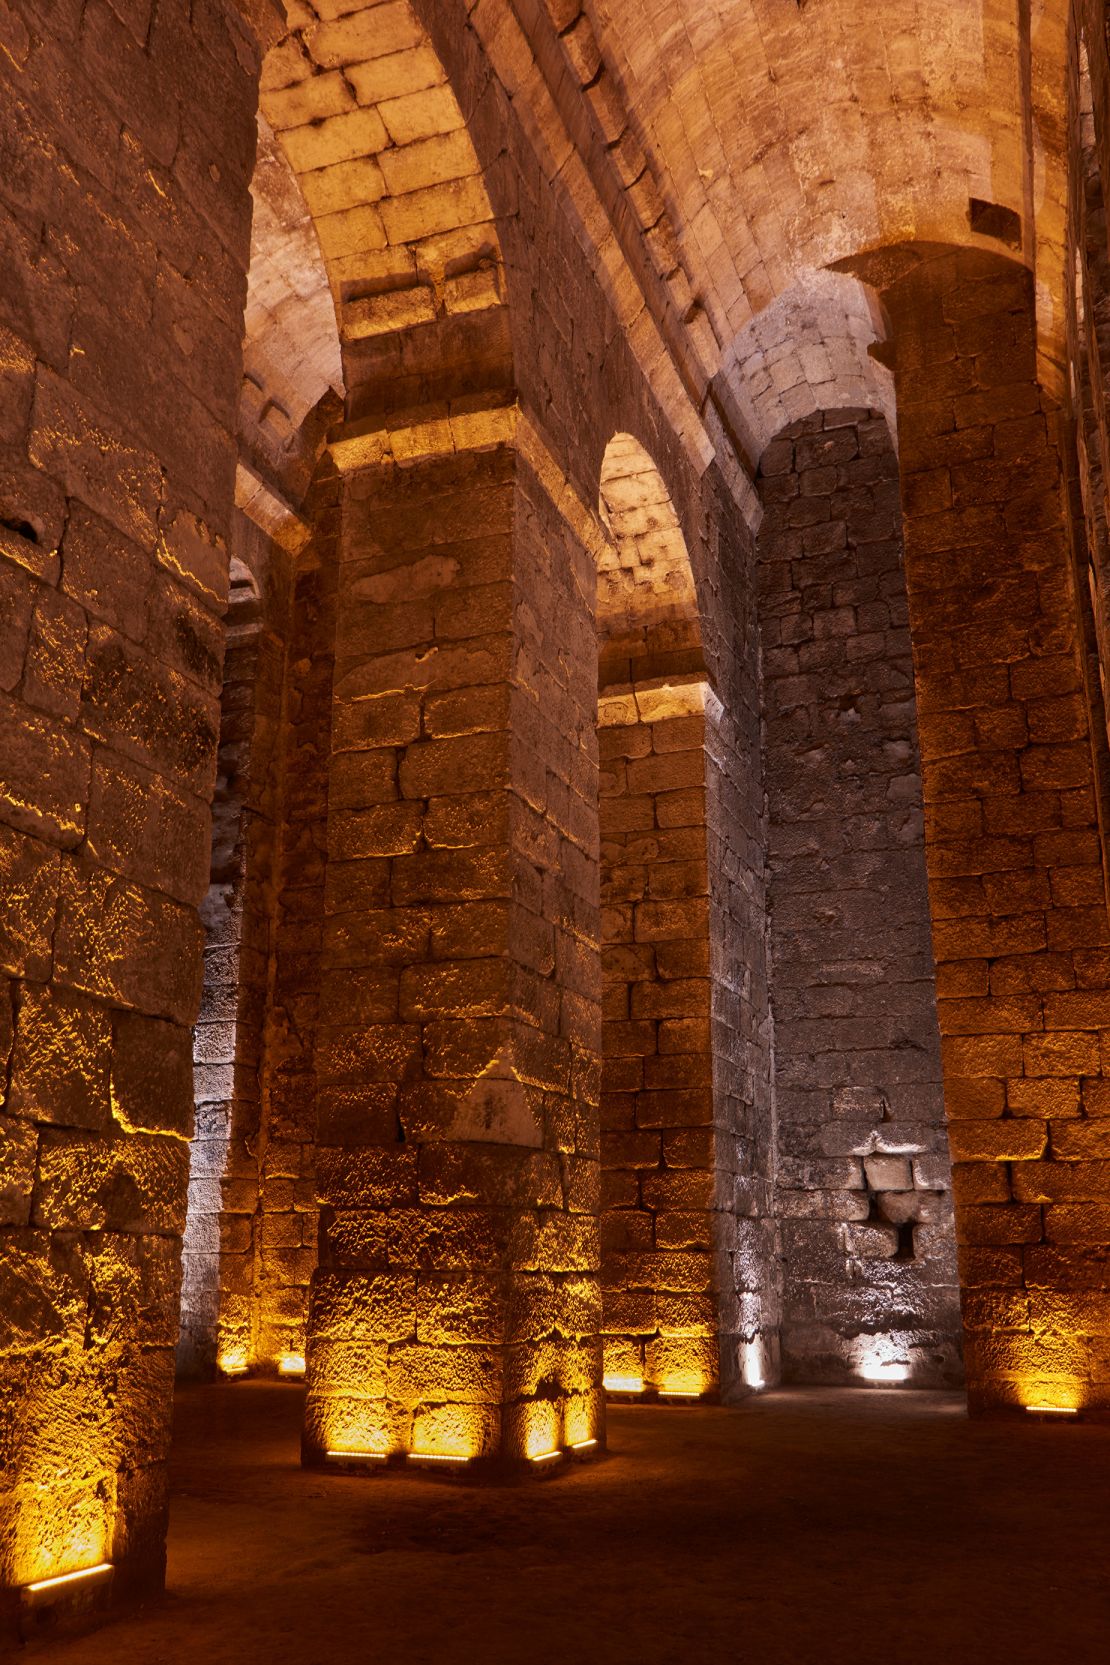 Dara's cisterns were once rumored to be dungeons.